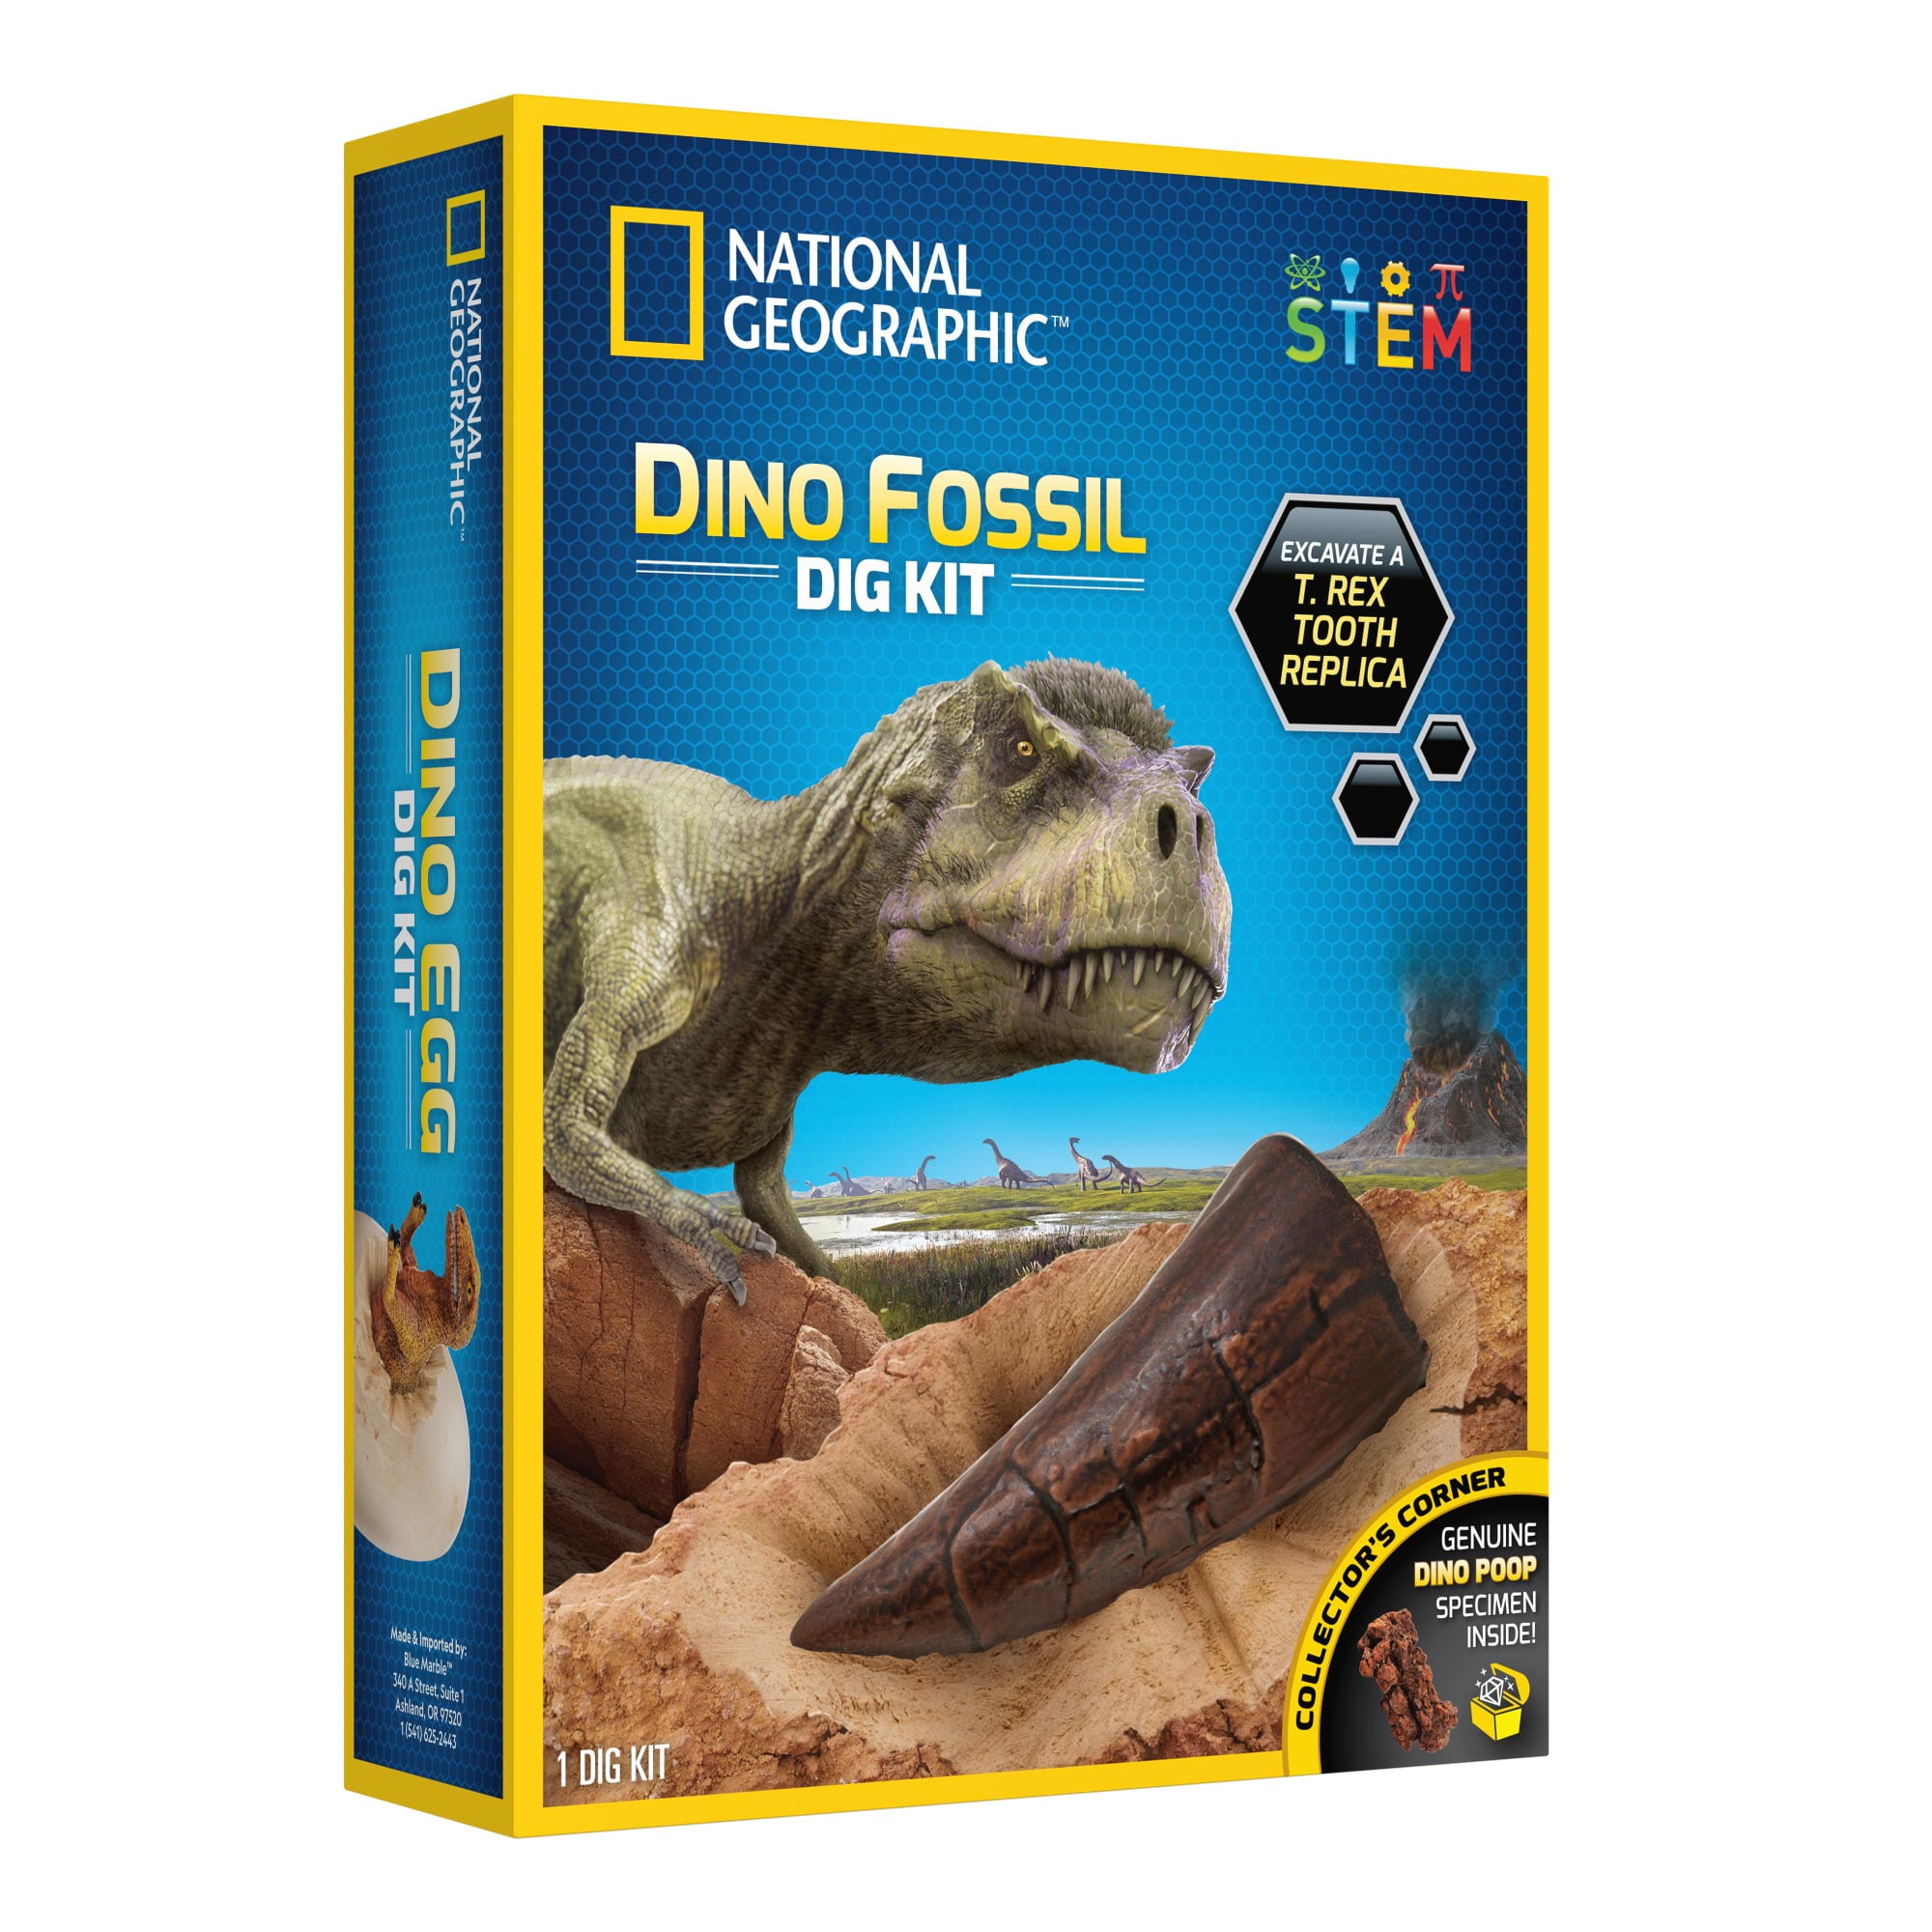 Dinosaur Fossils Animal Excavation Digging Kit Colouring Book and Pencils 